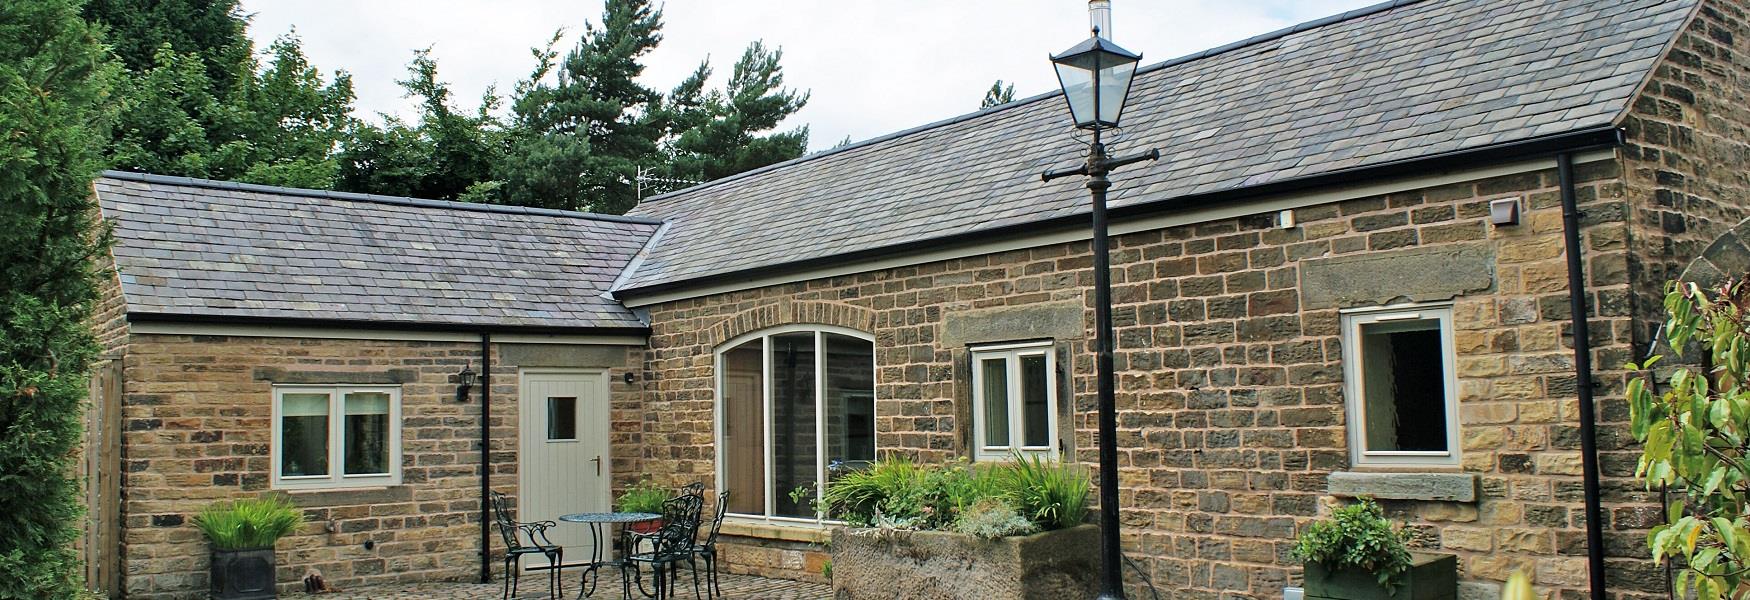 Goosberry Barn Holiday Home at Holmesfield